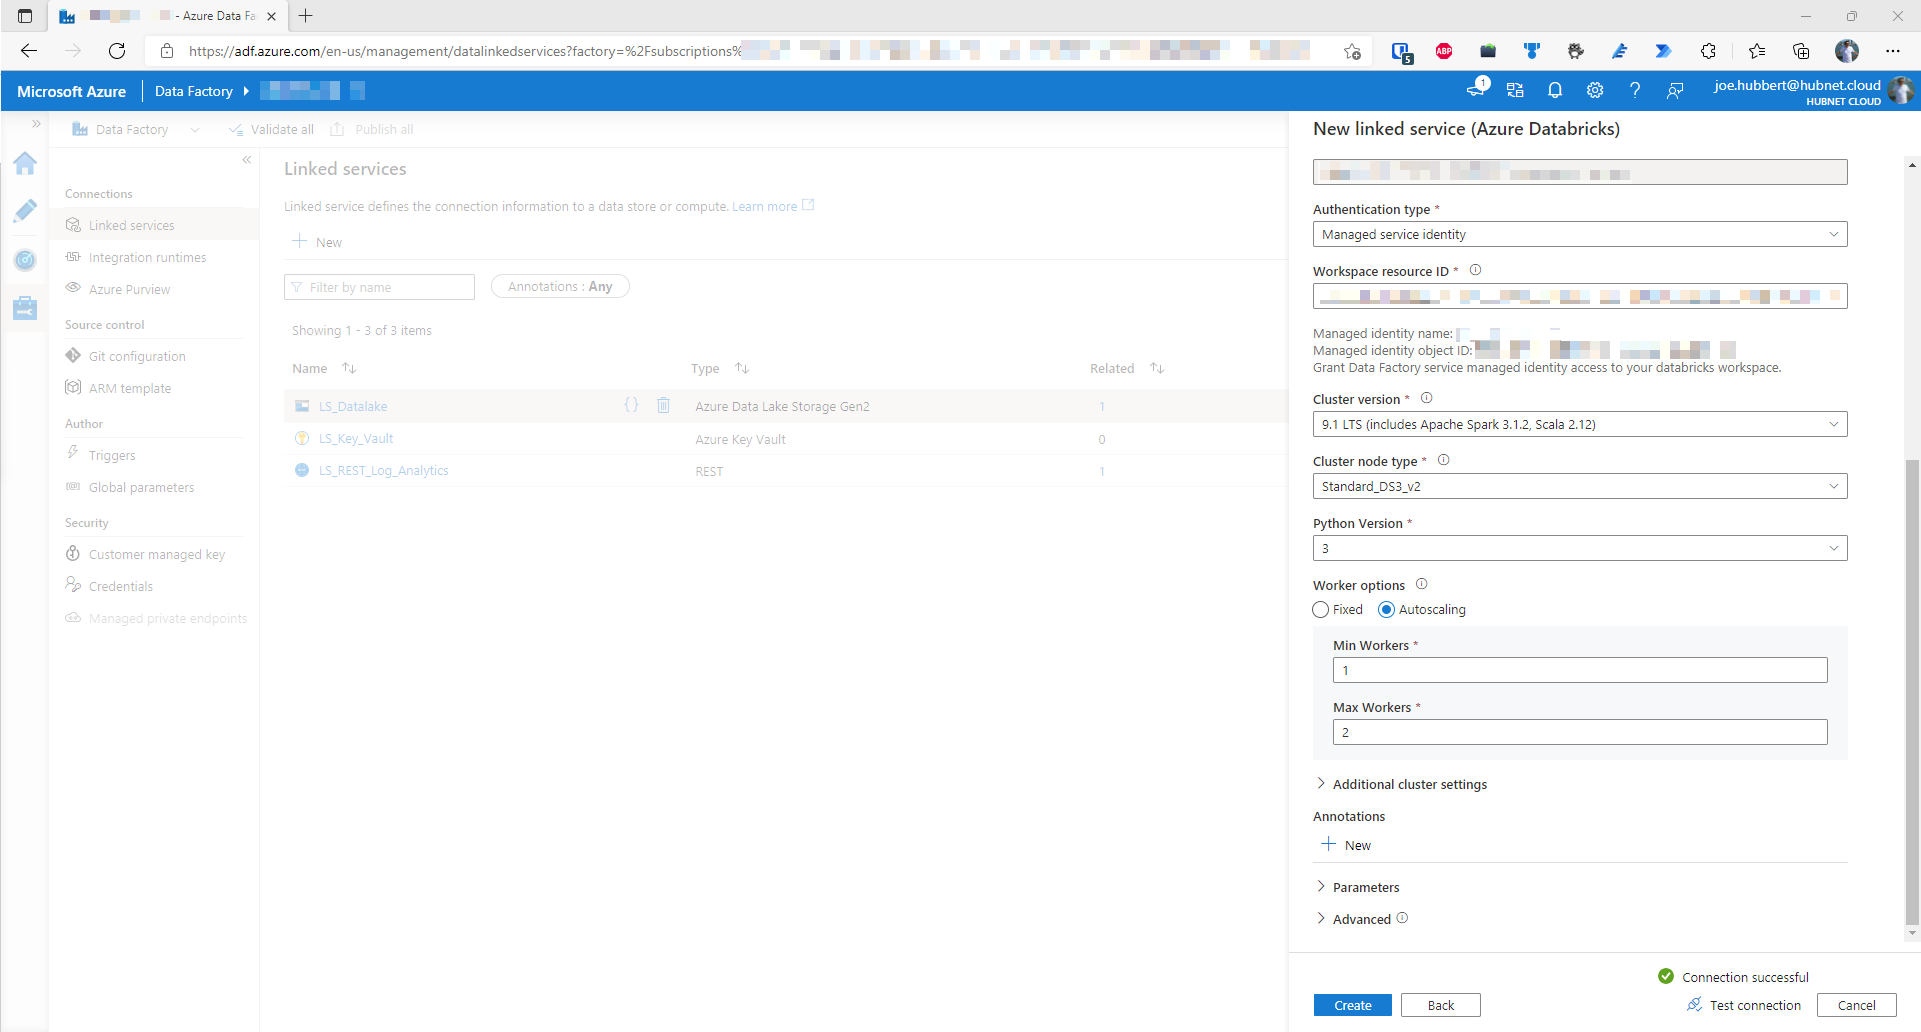 Screenshot of Azure Data Factory showing what configuration for Azure Databricks linked service should look like part 2